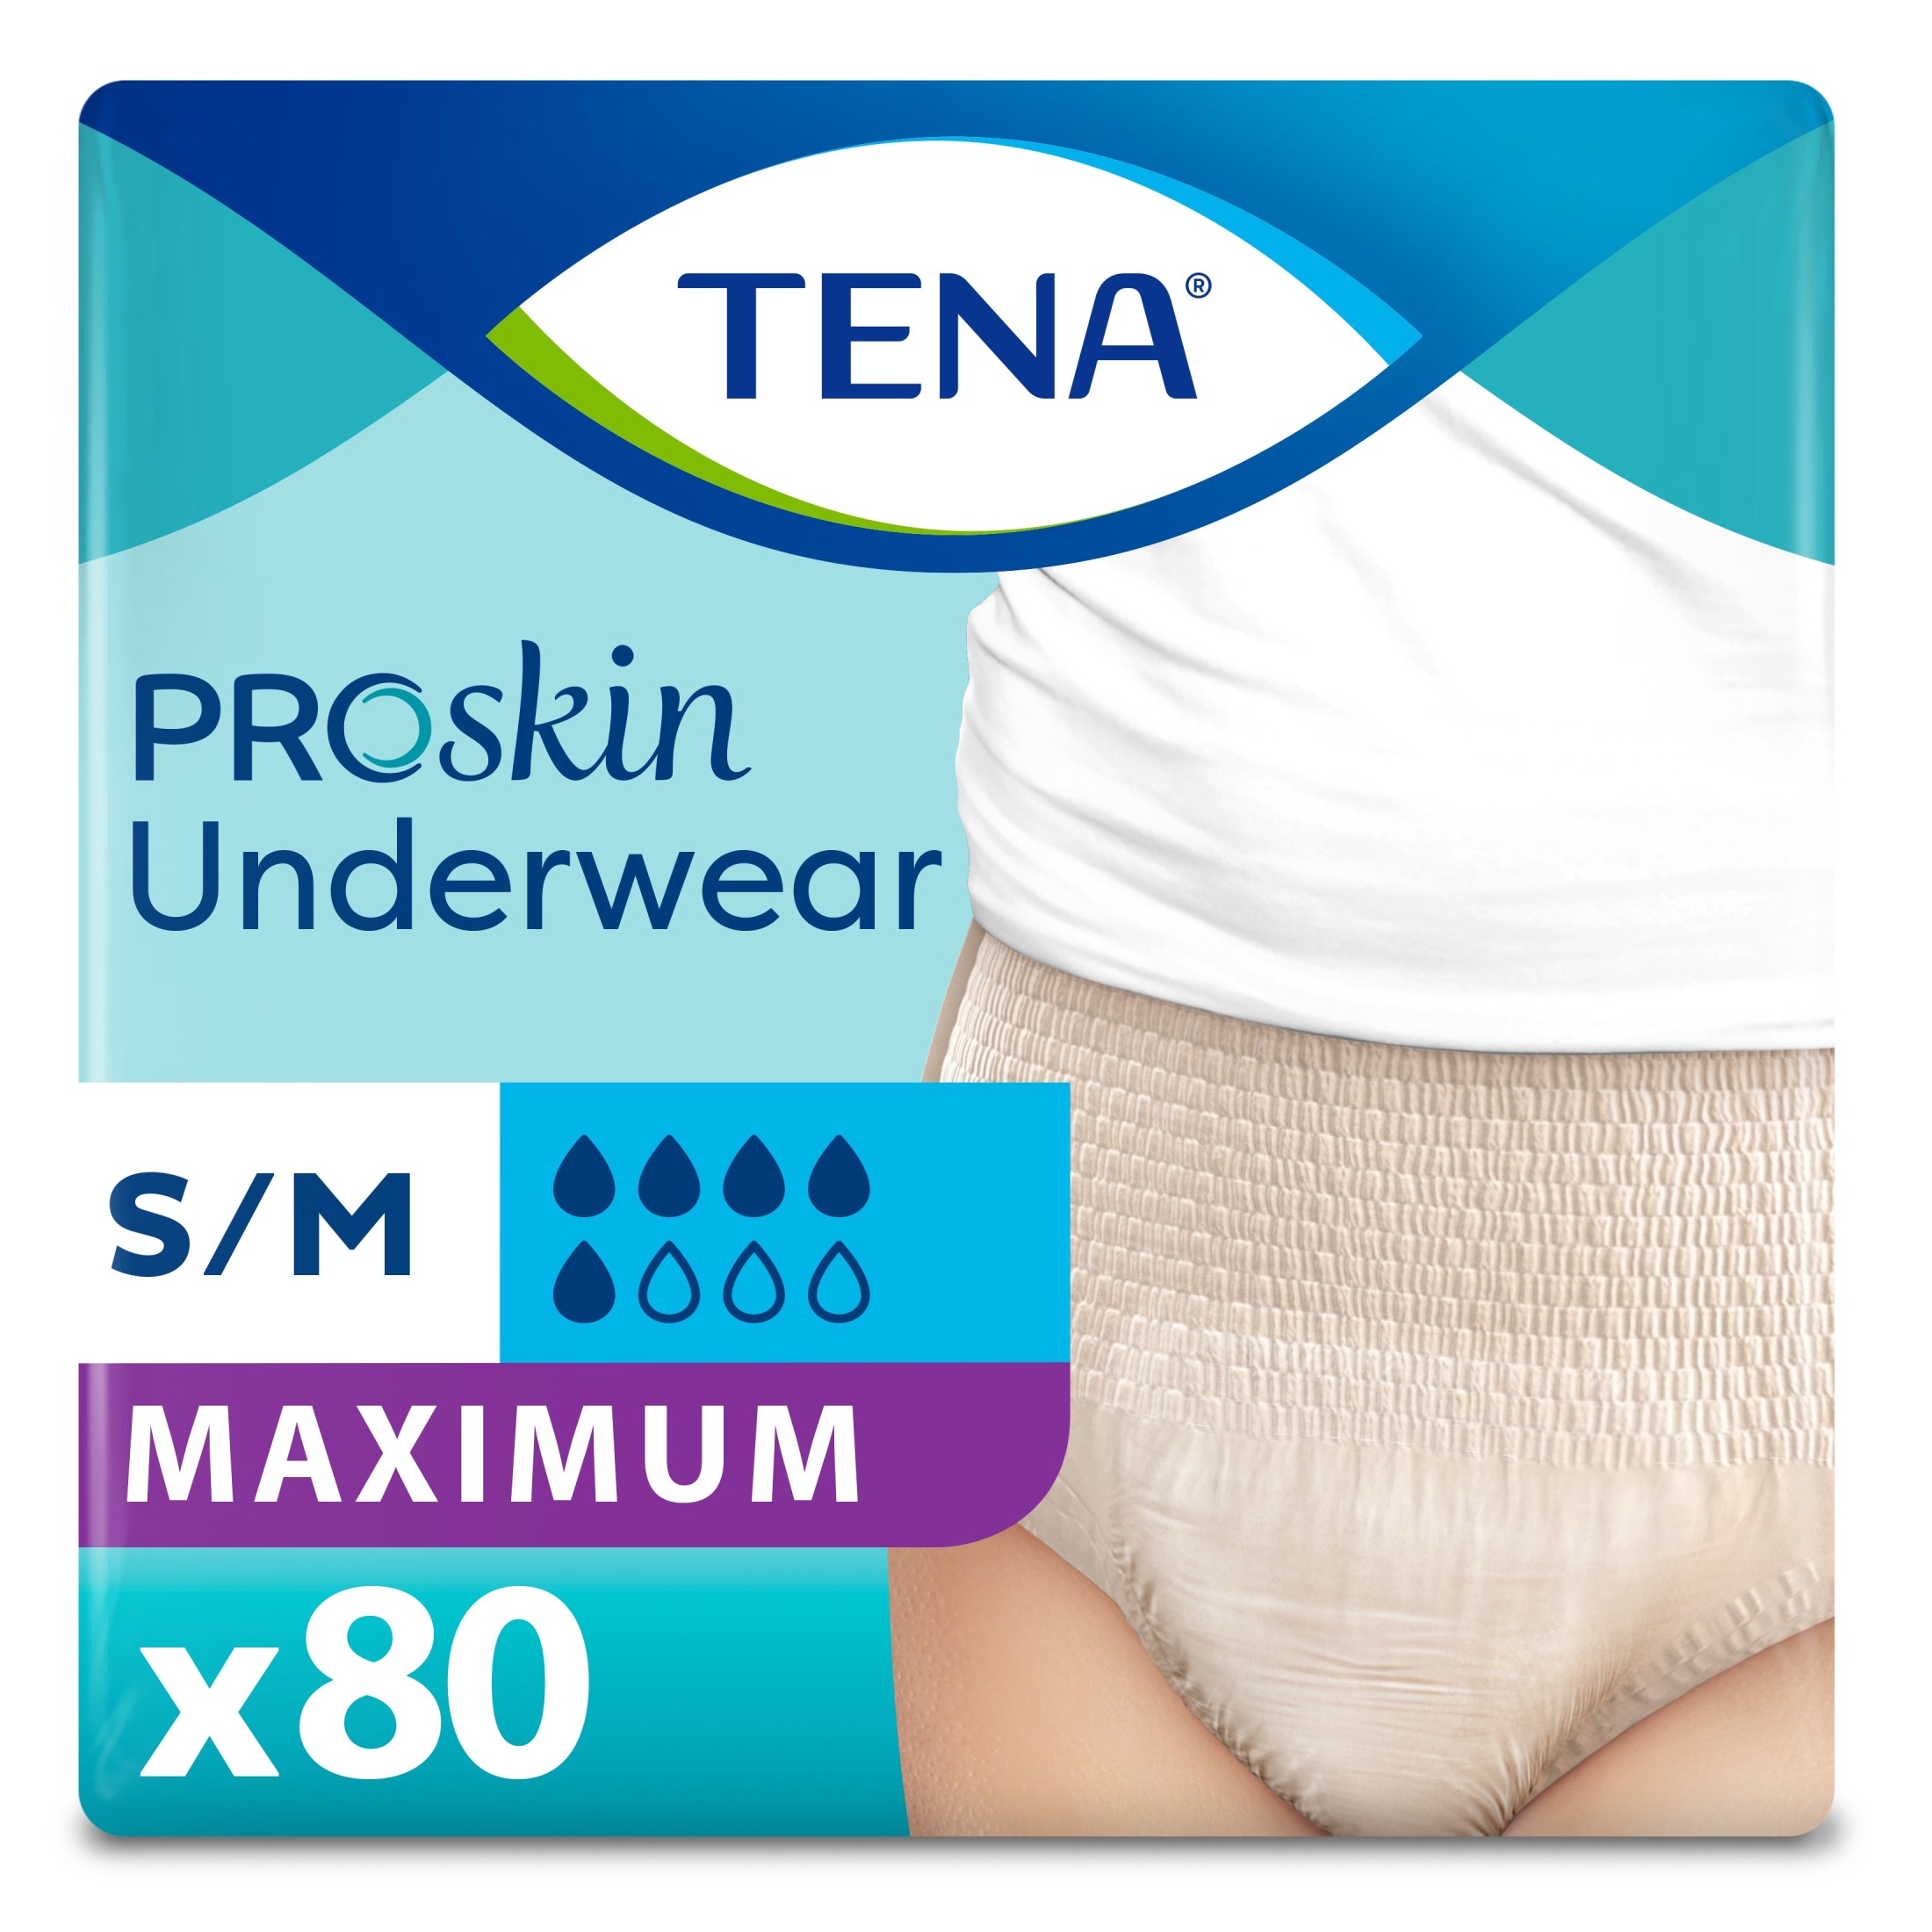 Tena ProSkin Incontinence Underwear for Women, Maximum, S/M, 80 Ct - image 1 of 8